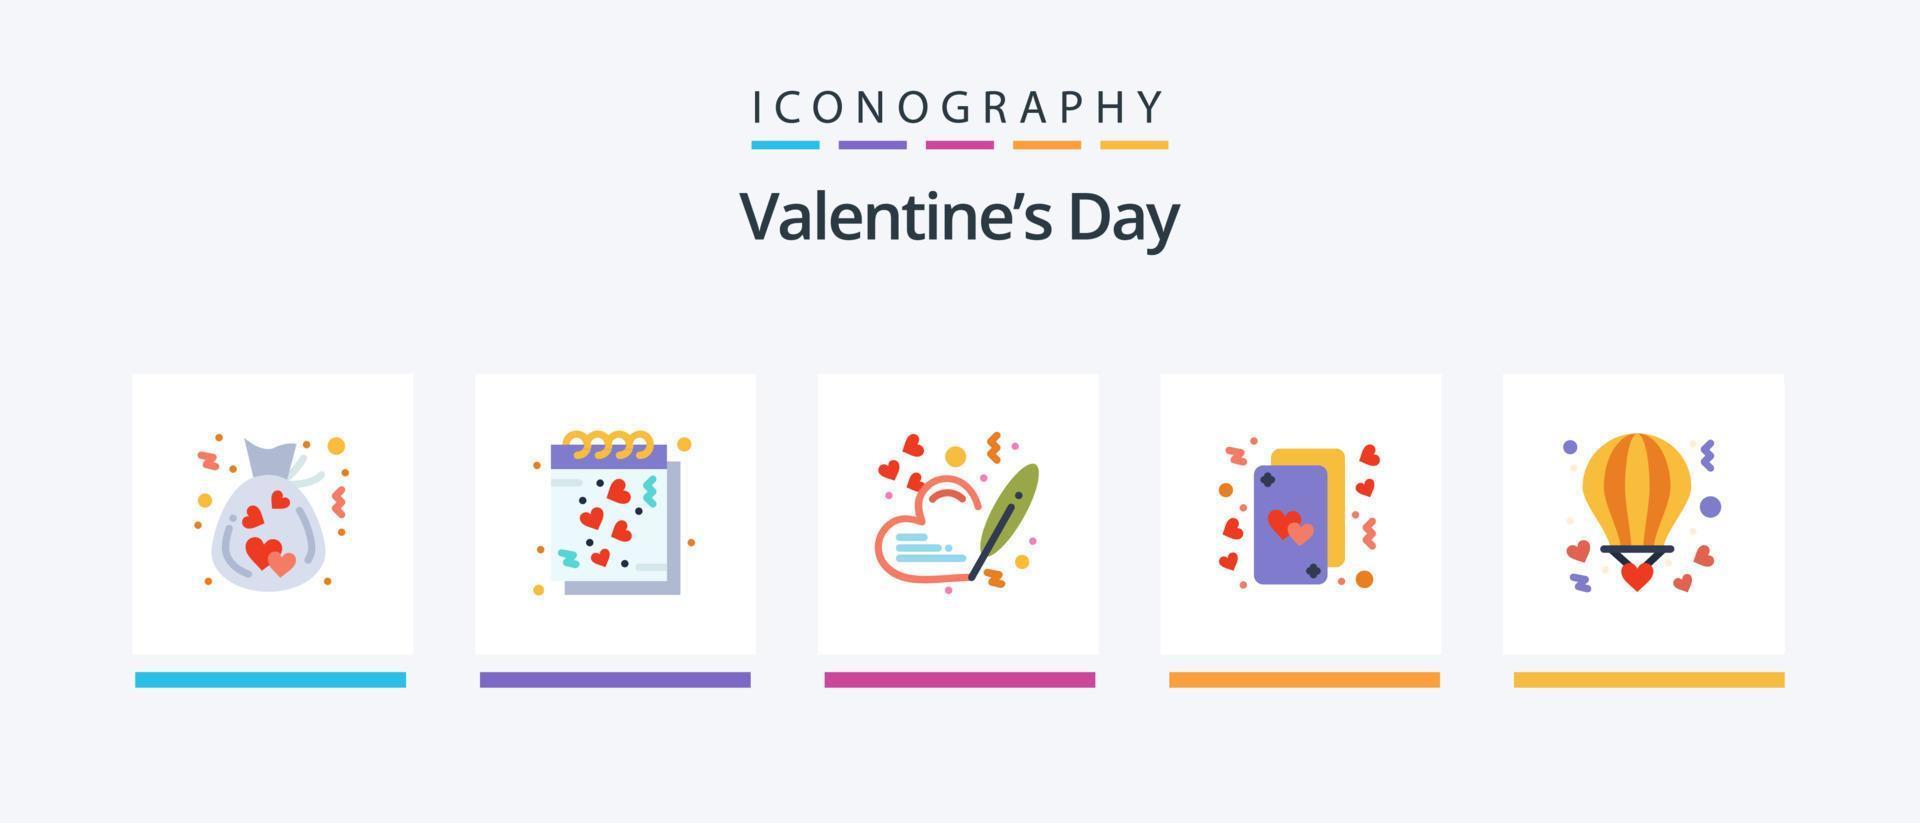 Valentines Day Flat 5 Icon Pack Including love. hearts. romantic. heart. wedding. Creative Icons Design vector